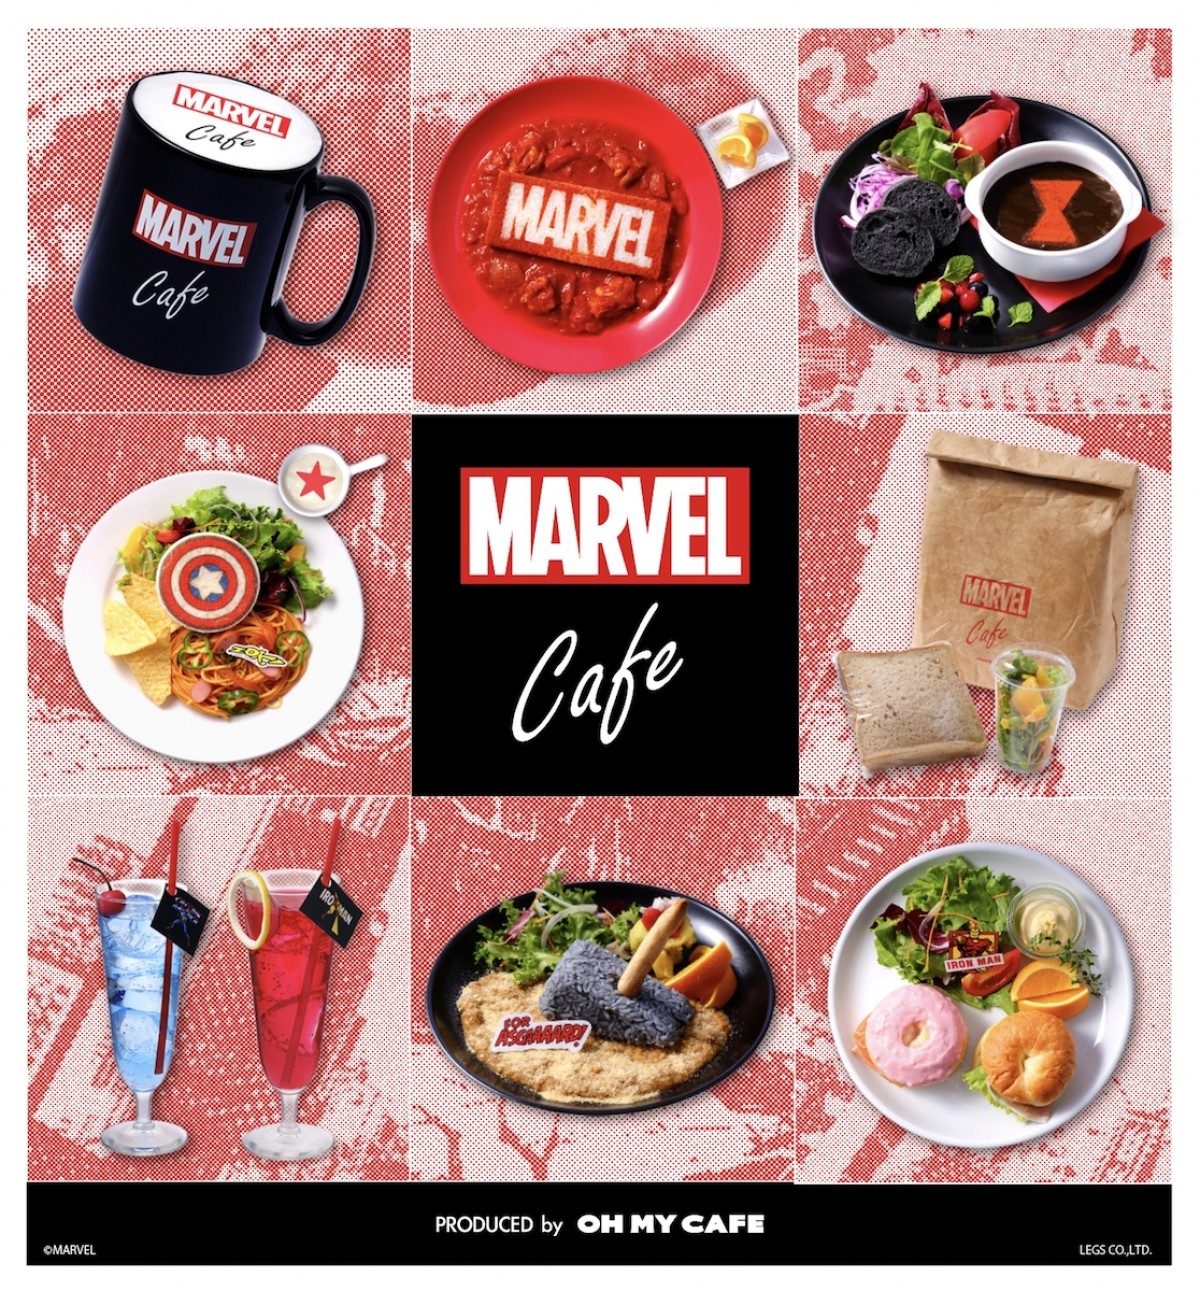 「MARVEL」cafe produced by OH MY CAFE　メインビジュアル特典